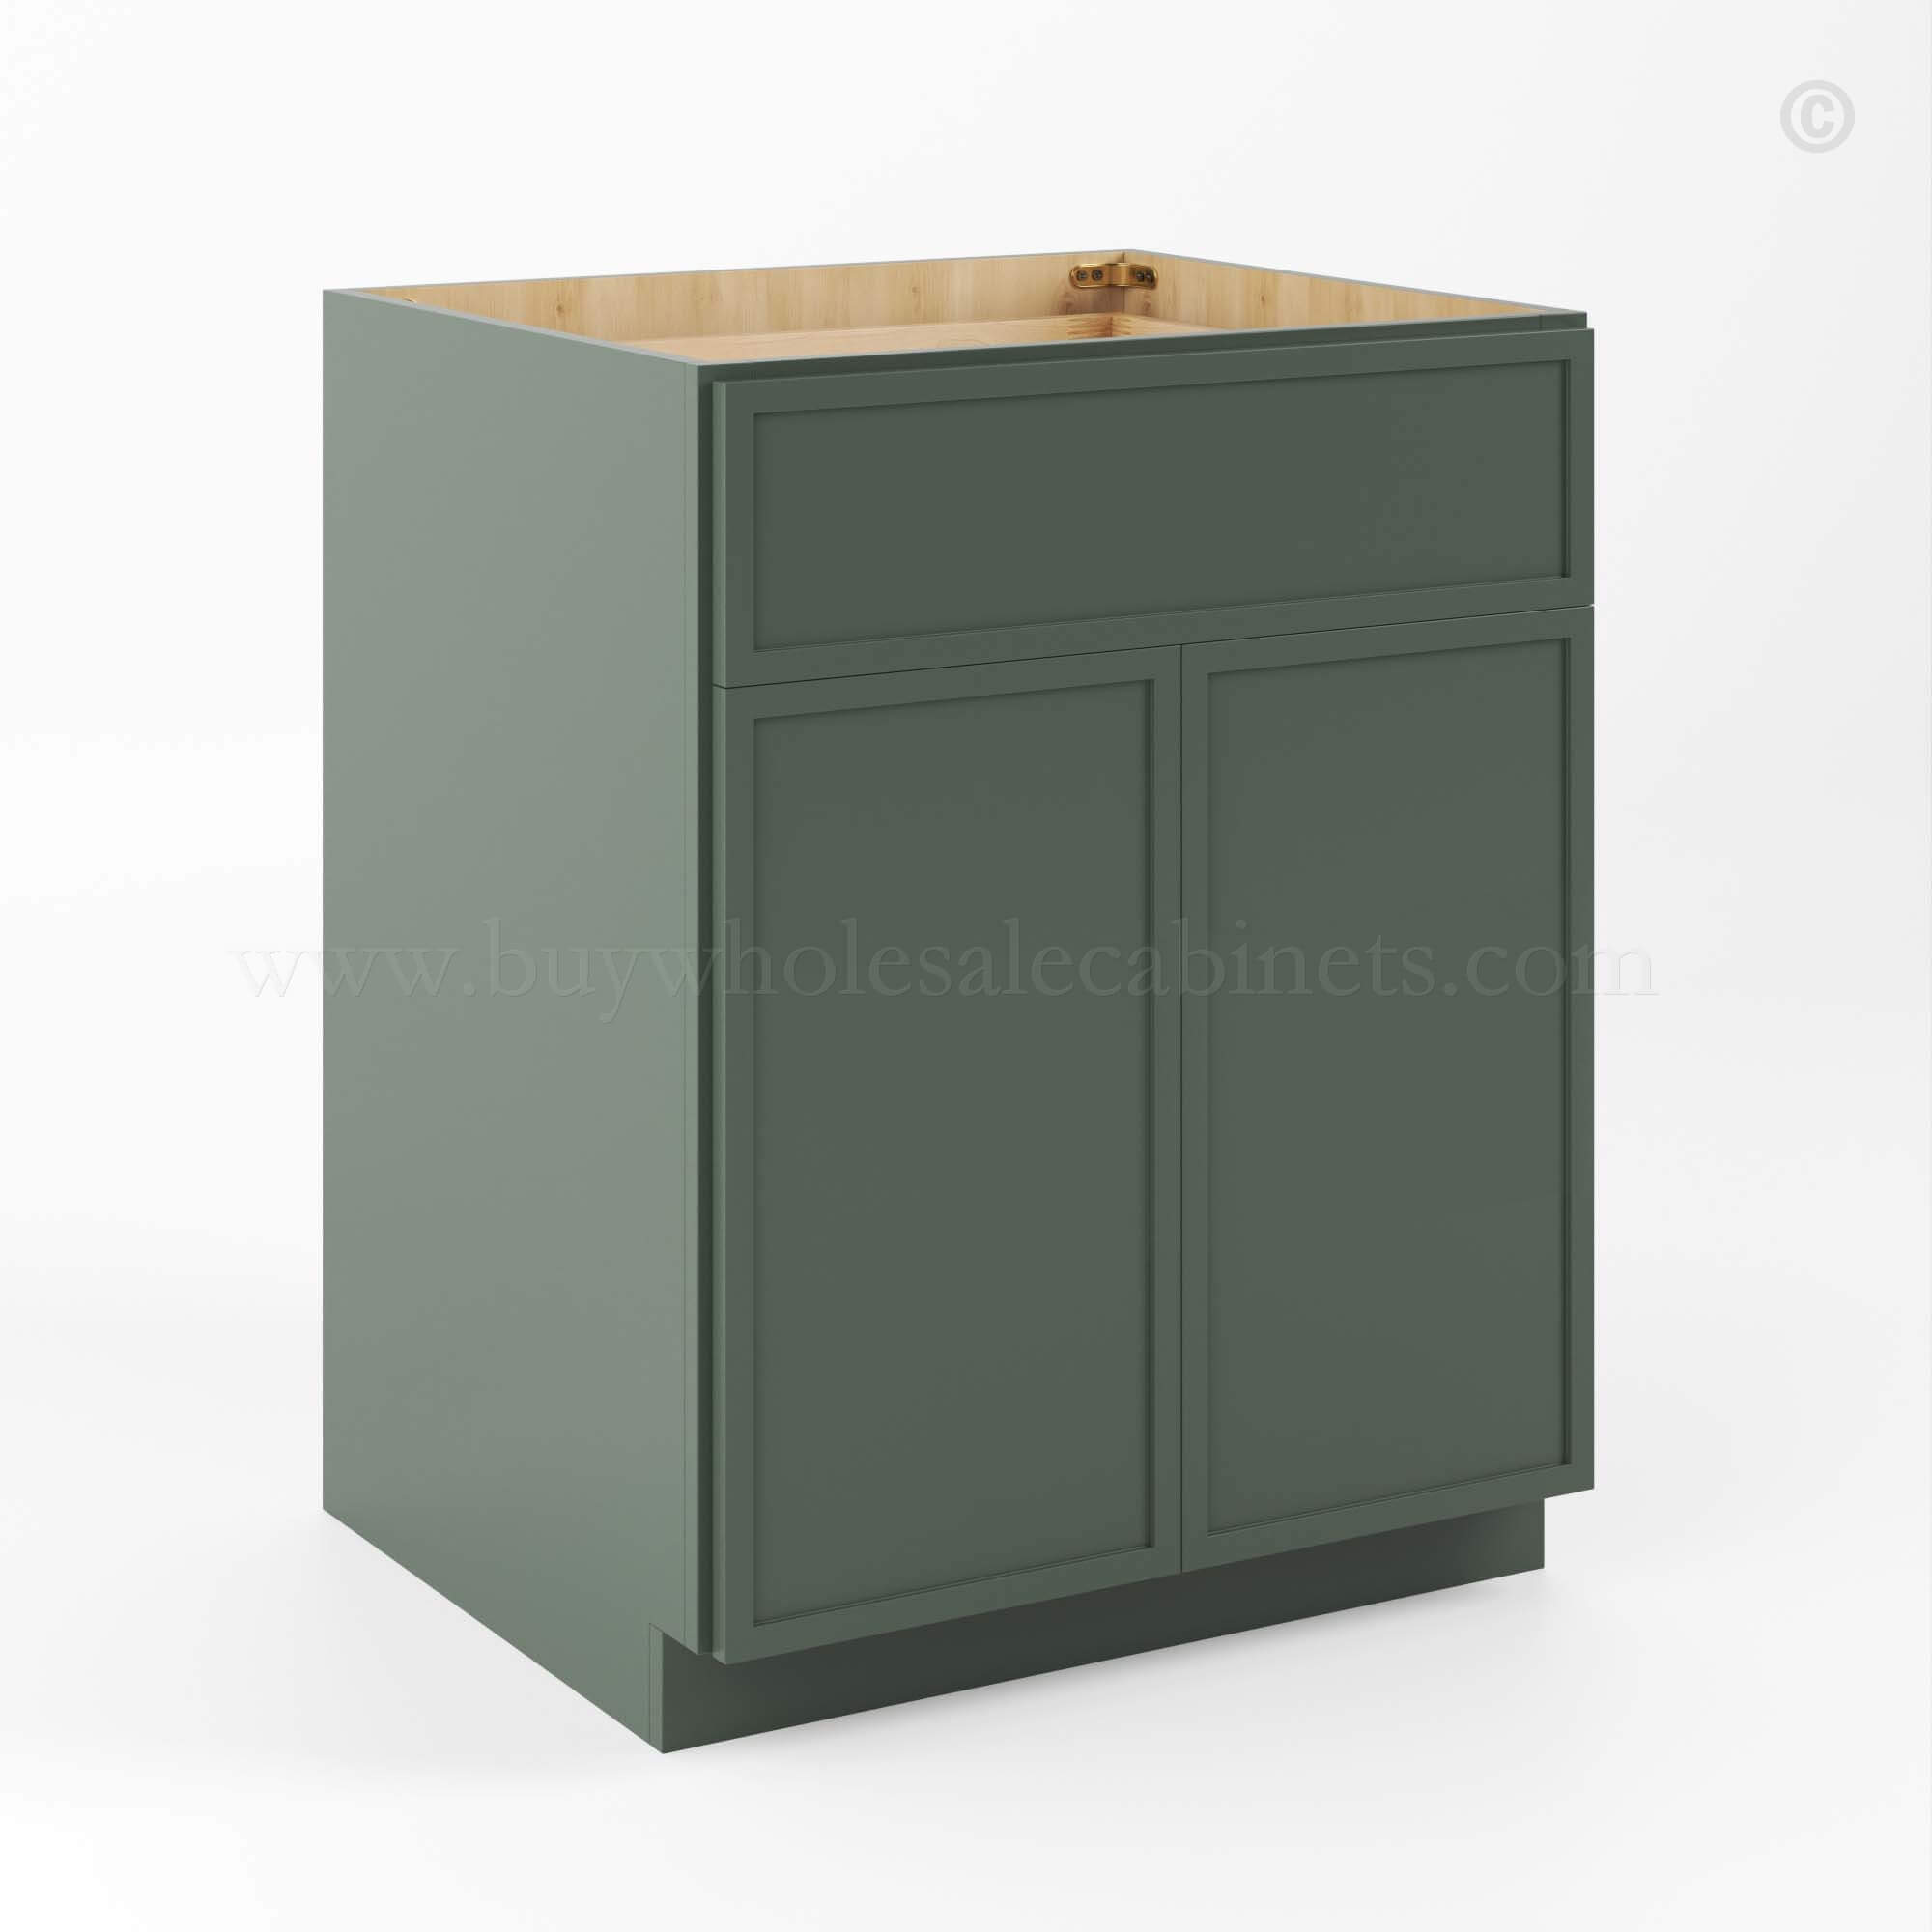 Slim Shaker Green Base Cabinet Double Door & Single Drawer, rta cabinets, wholesale cabinets